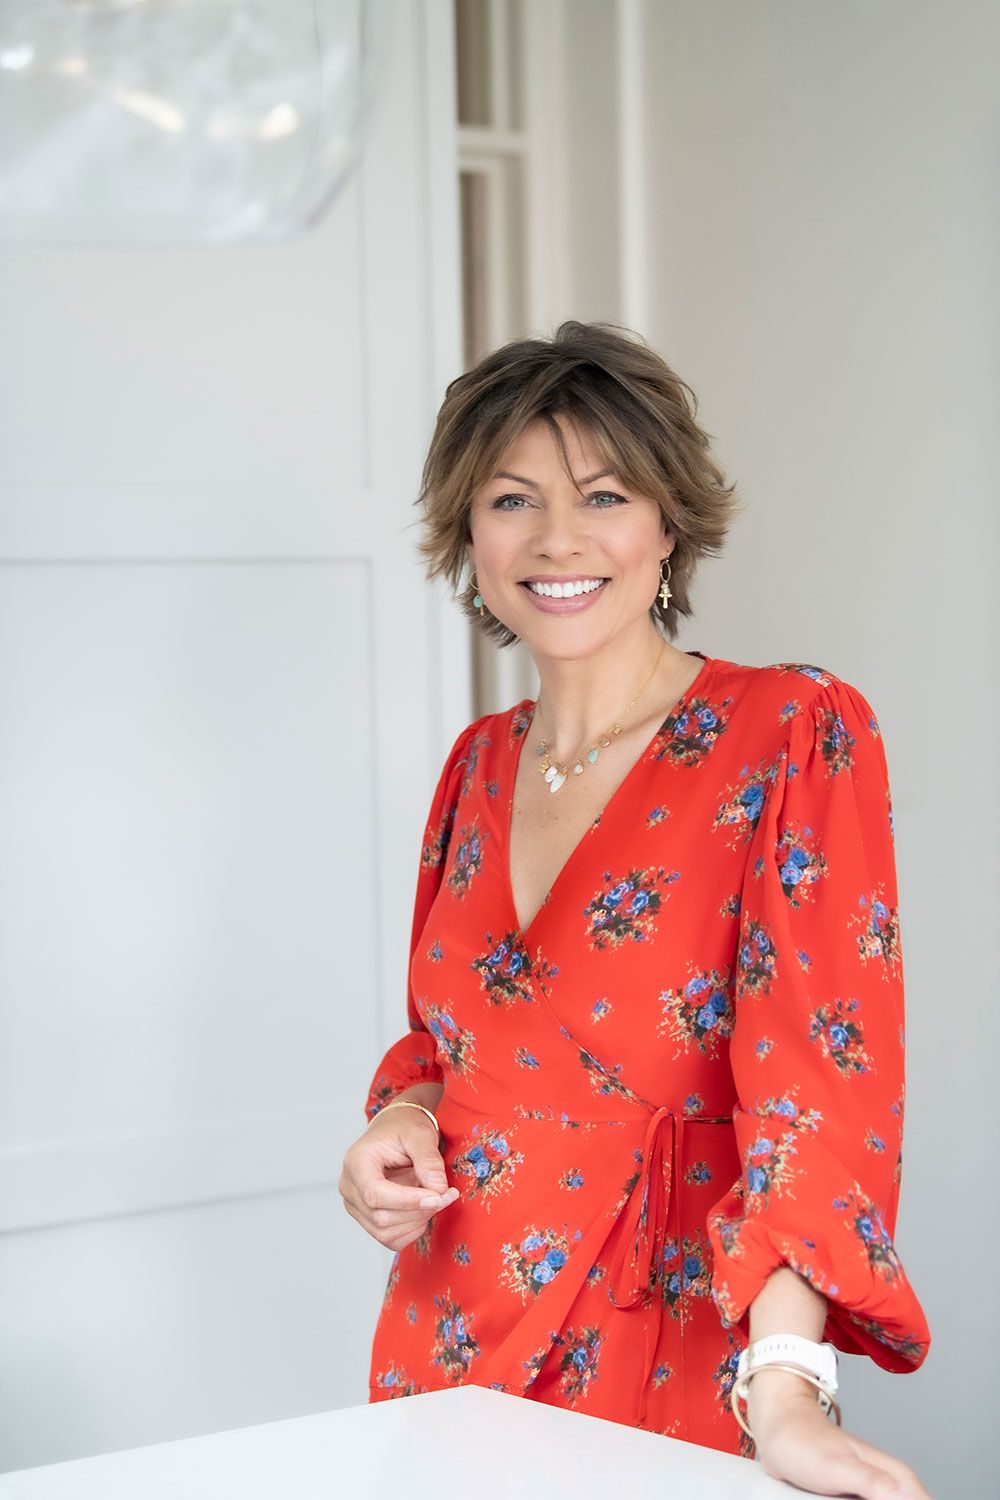 Kate Silverton smiling. She is wearing a red floral dress